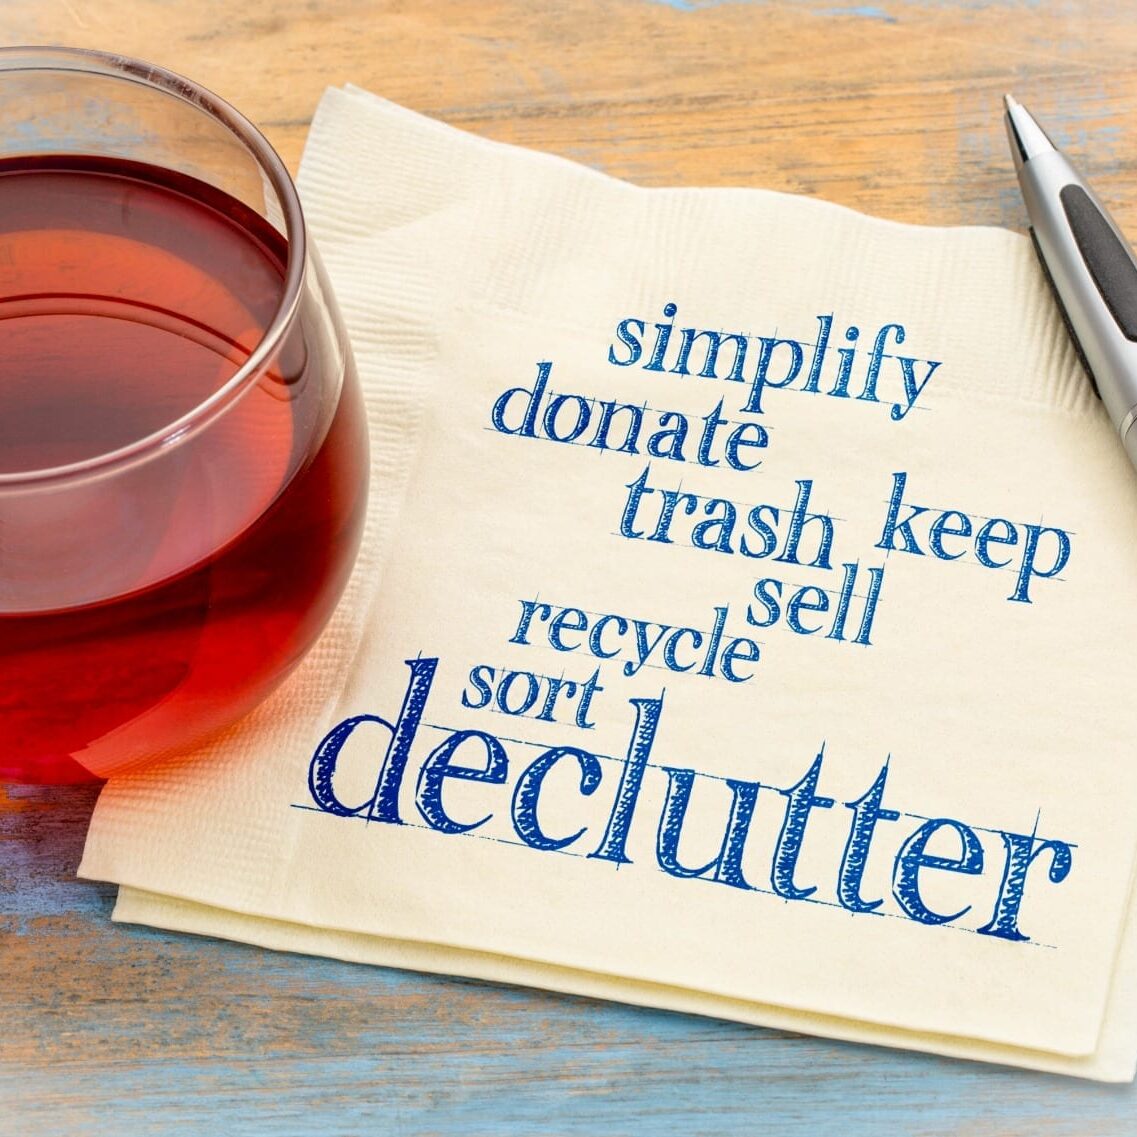 declutter and simplify word cloud on a napkin with a cup of tea